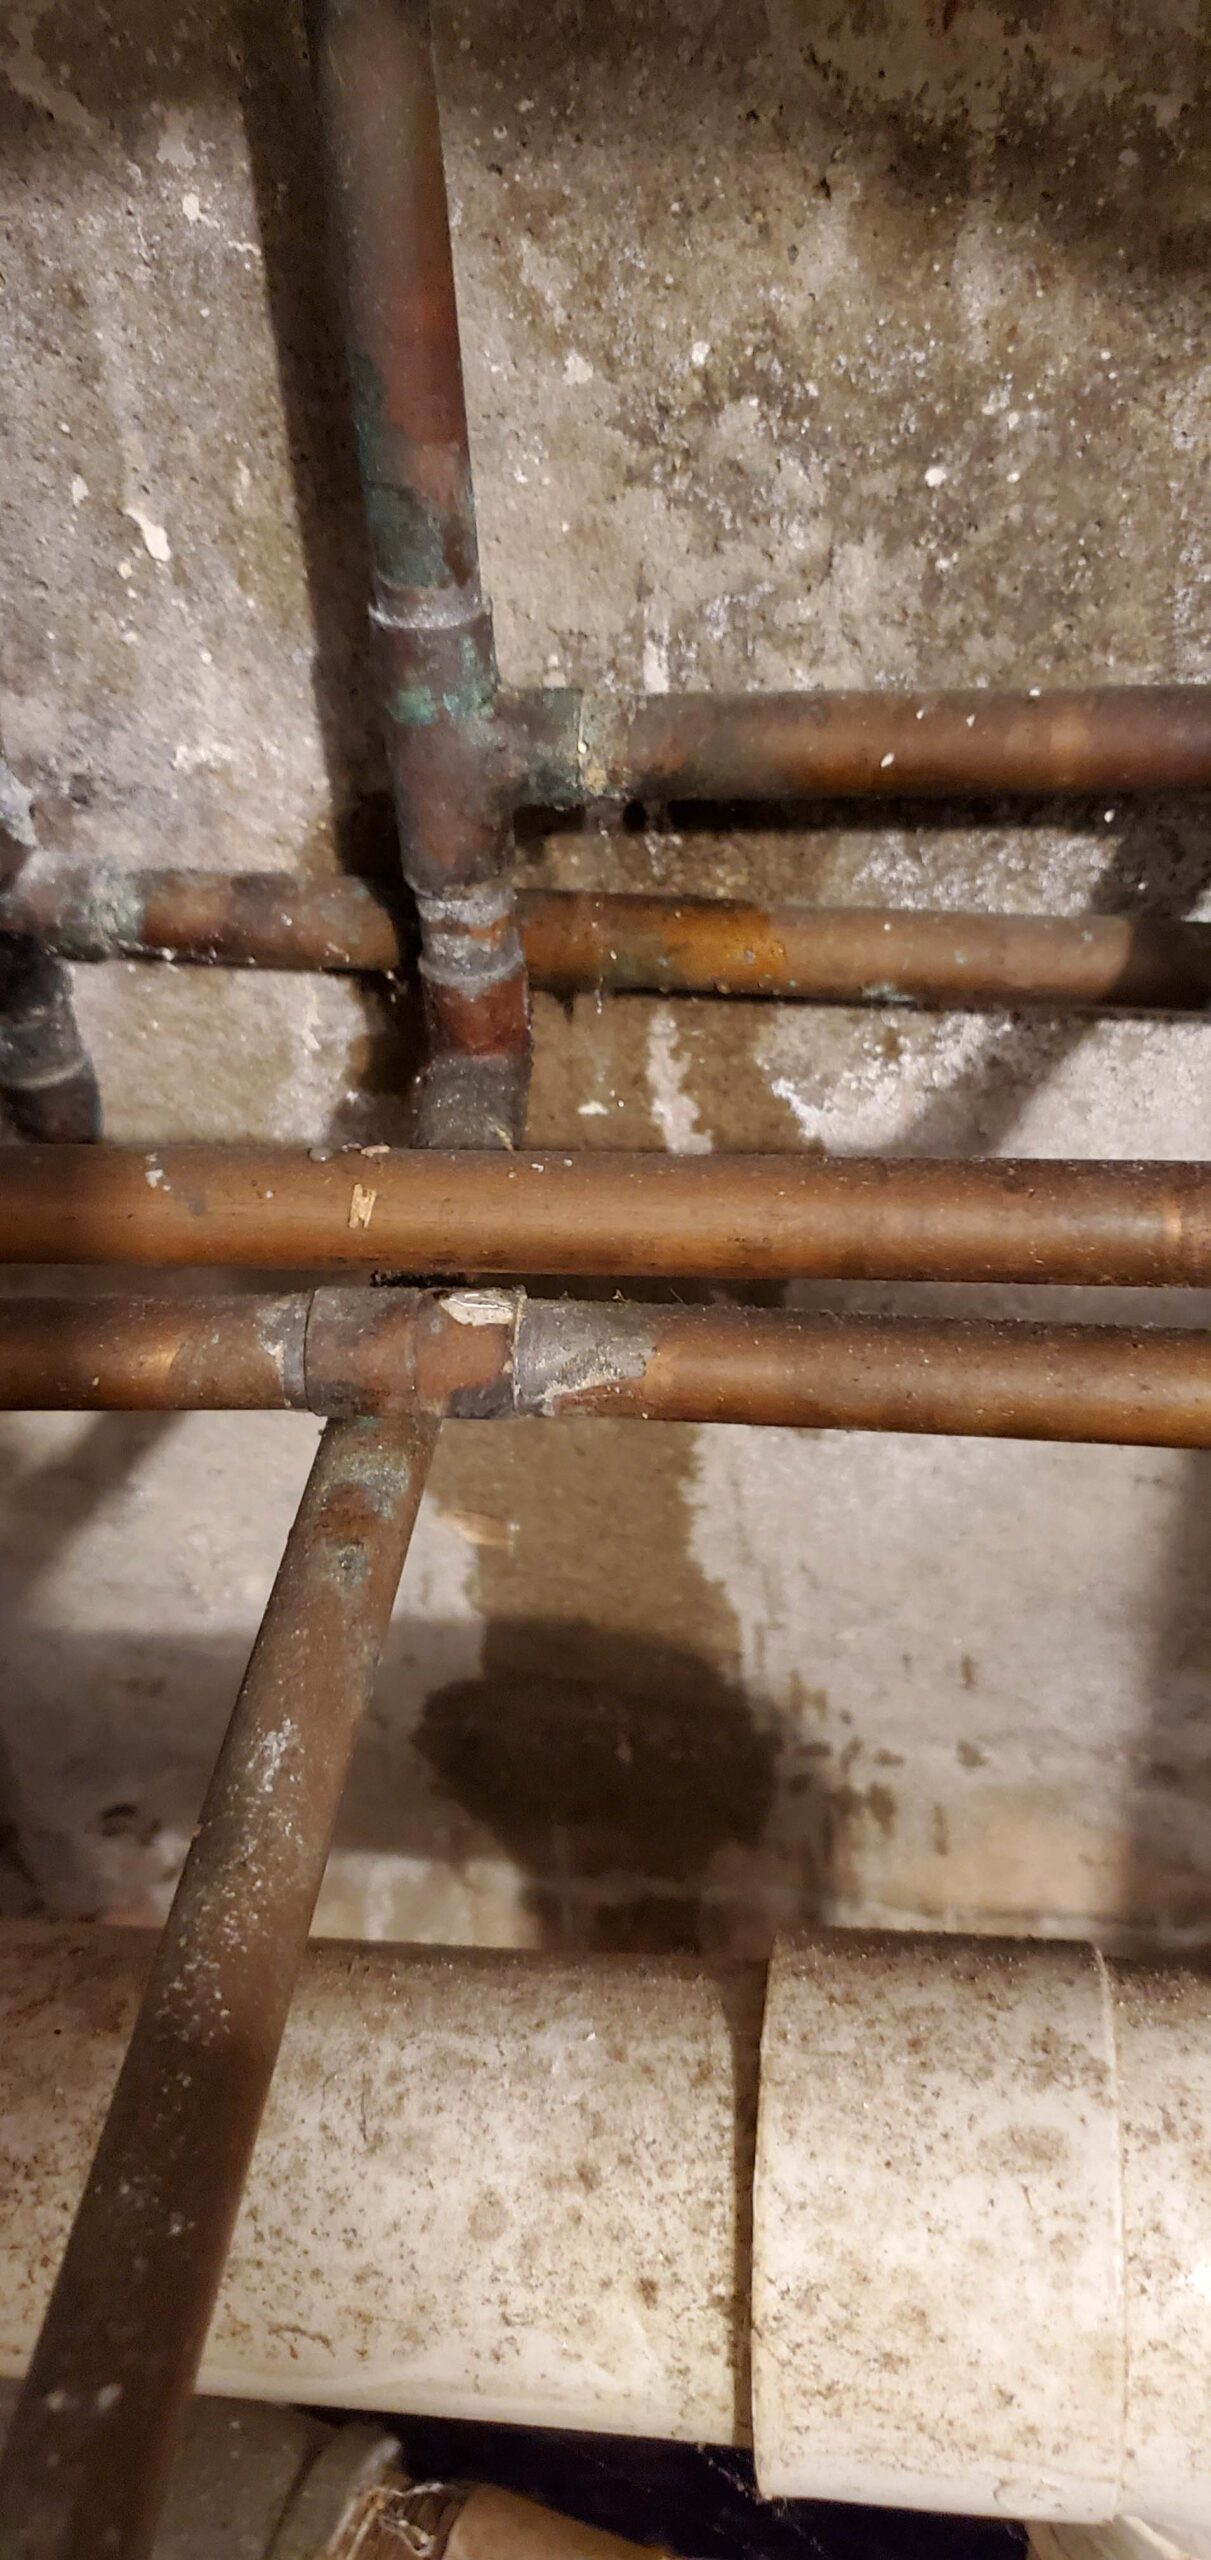 pipe water damage restoration in queens ny 11414